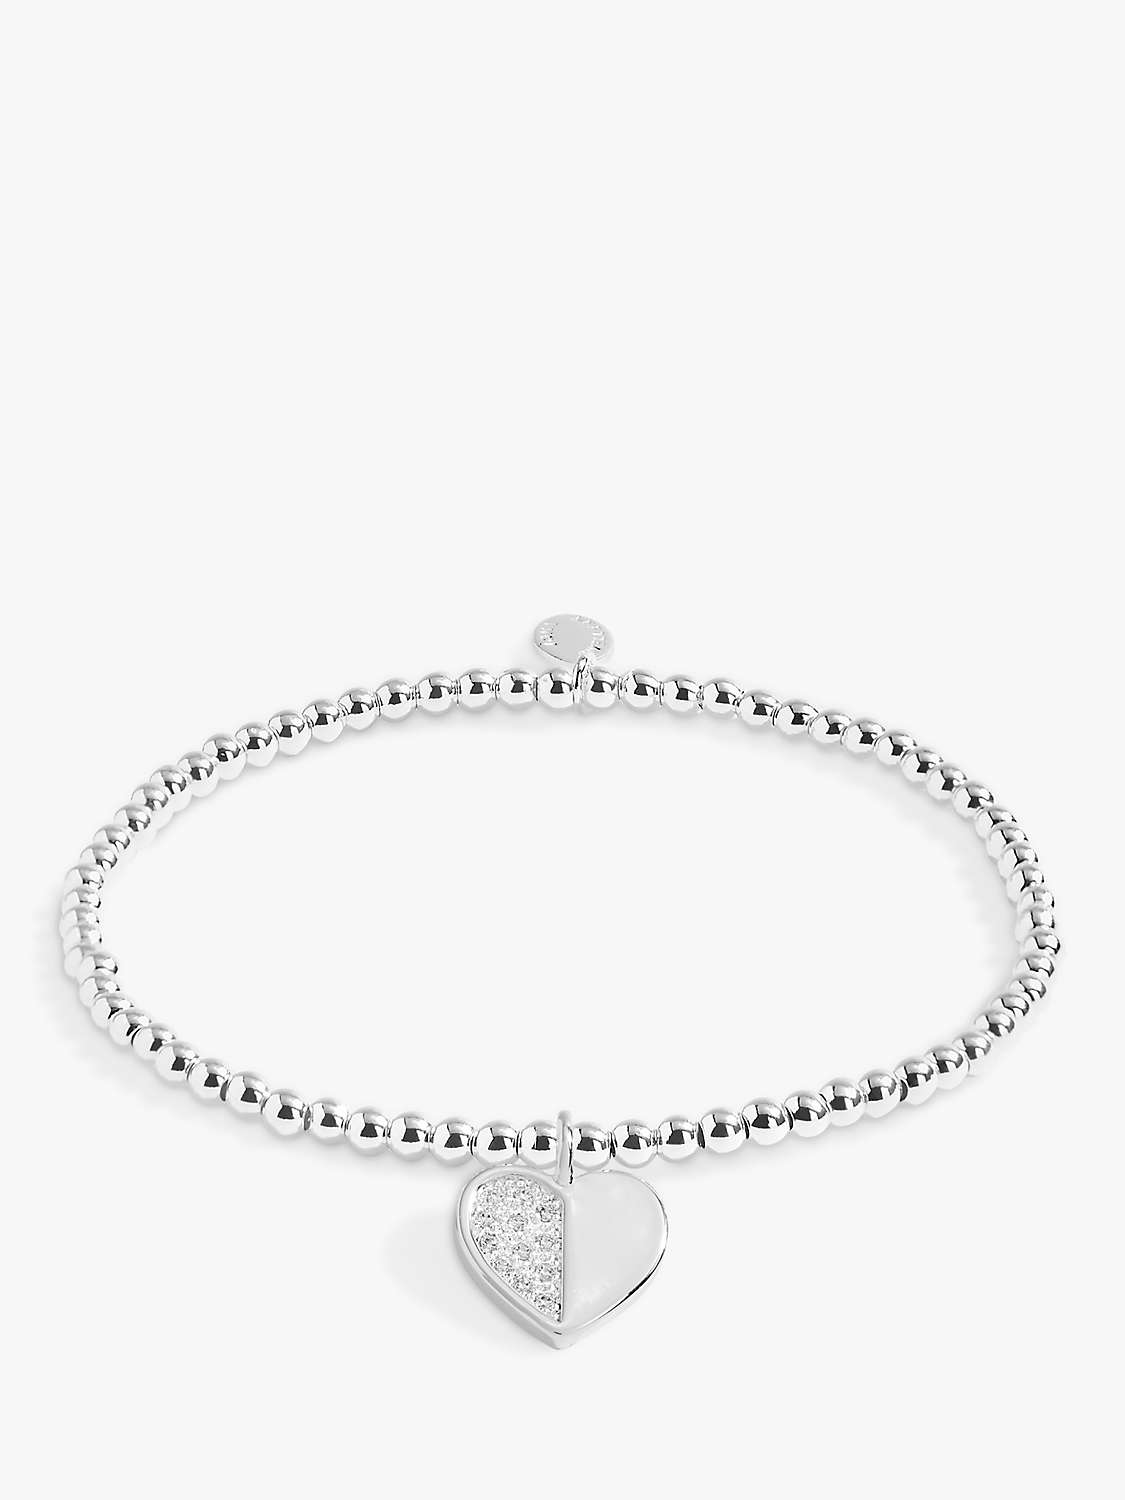 Buy Joma Jewellery 'Like A Mum To Me' Bracelet, Silver Online at johnlewis.com